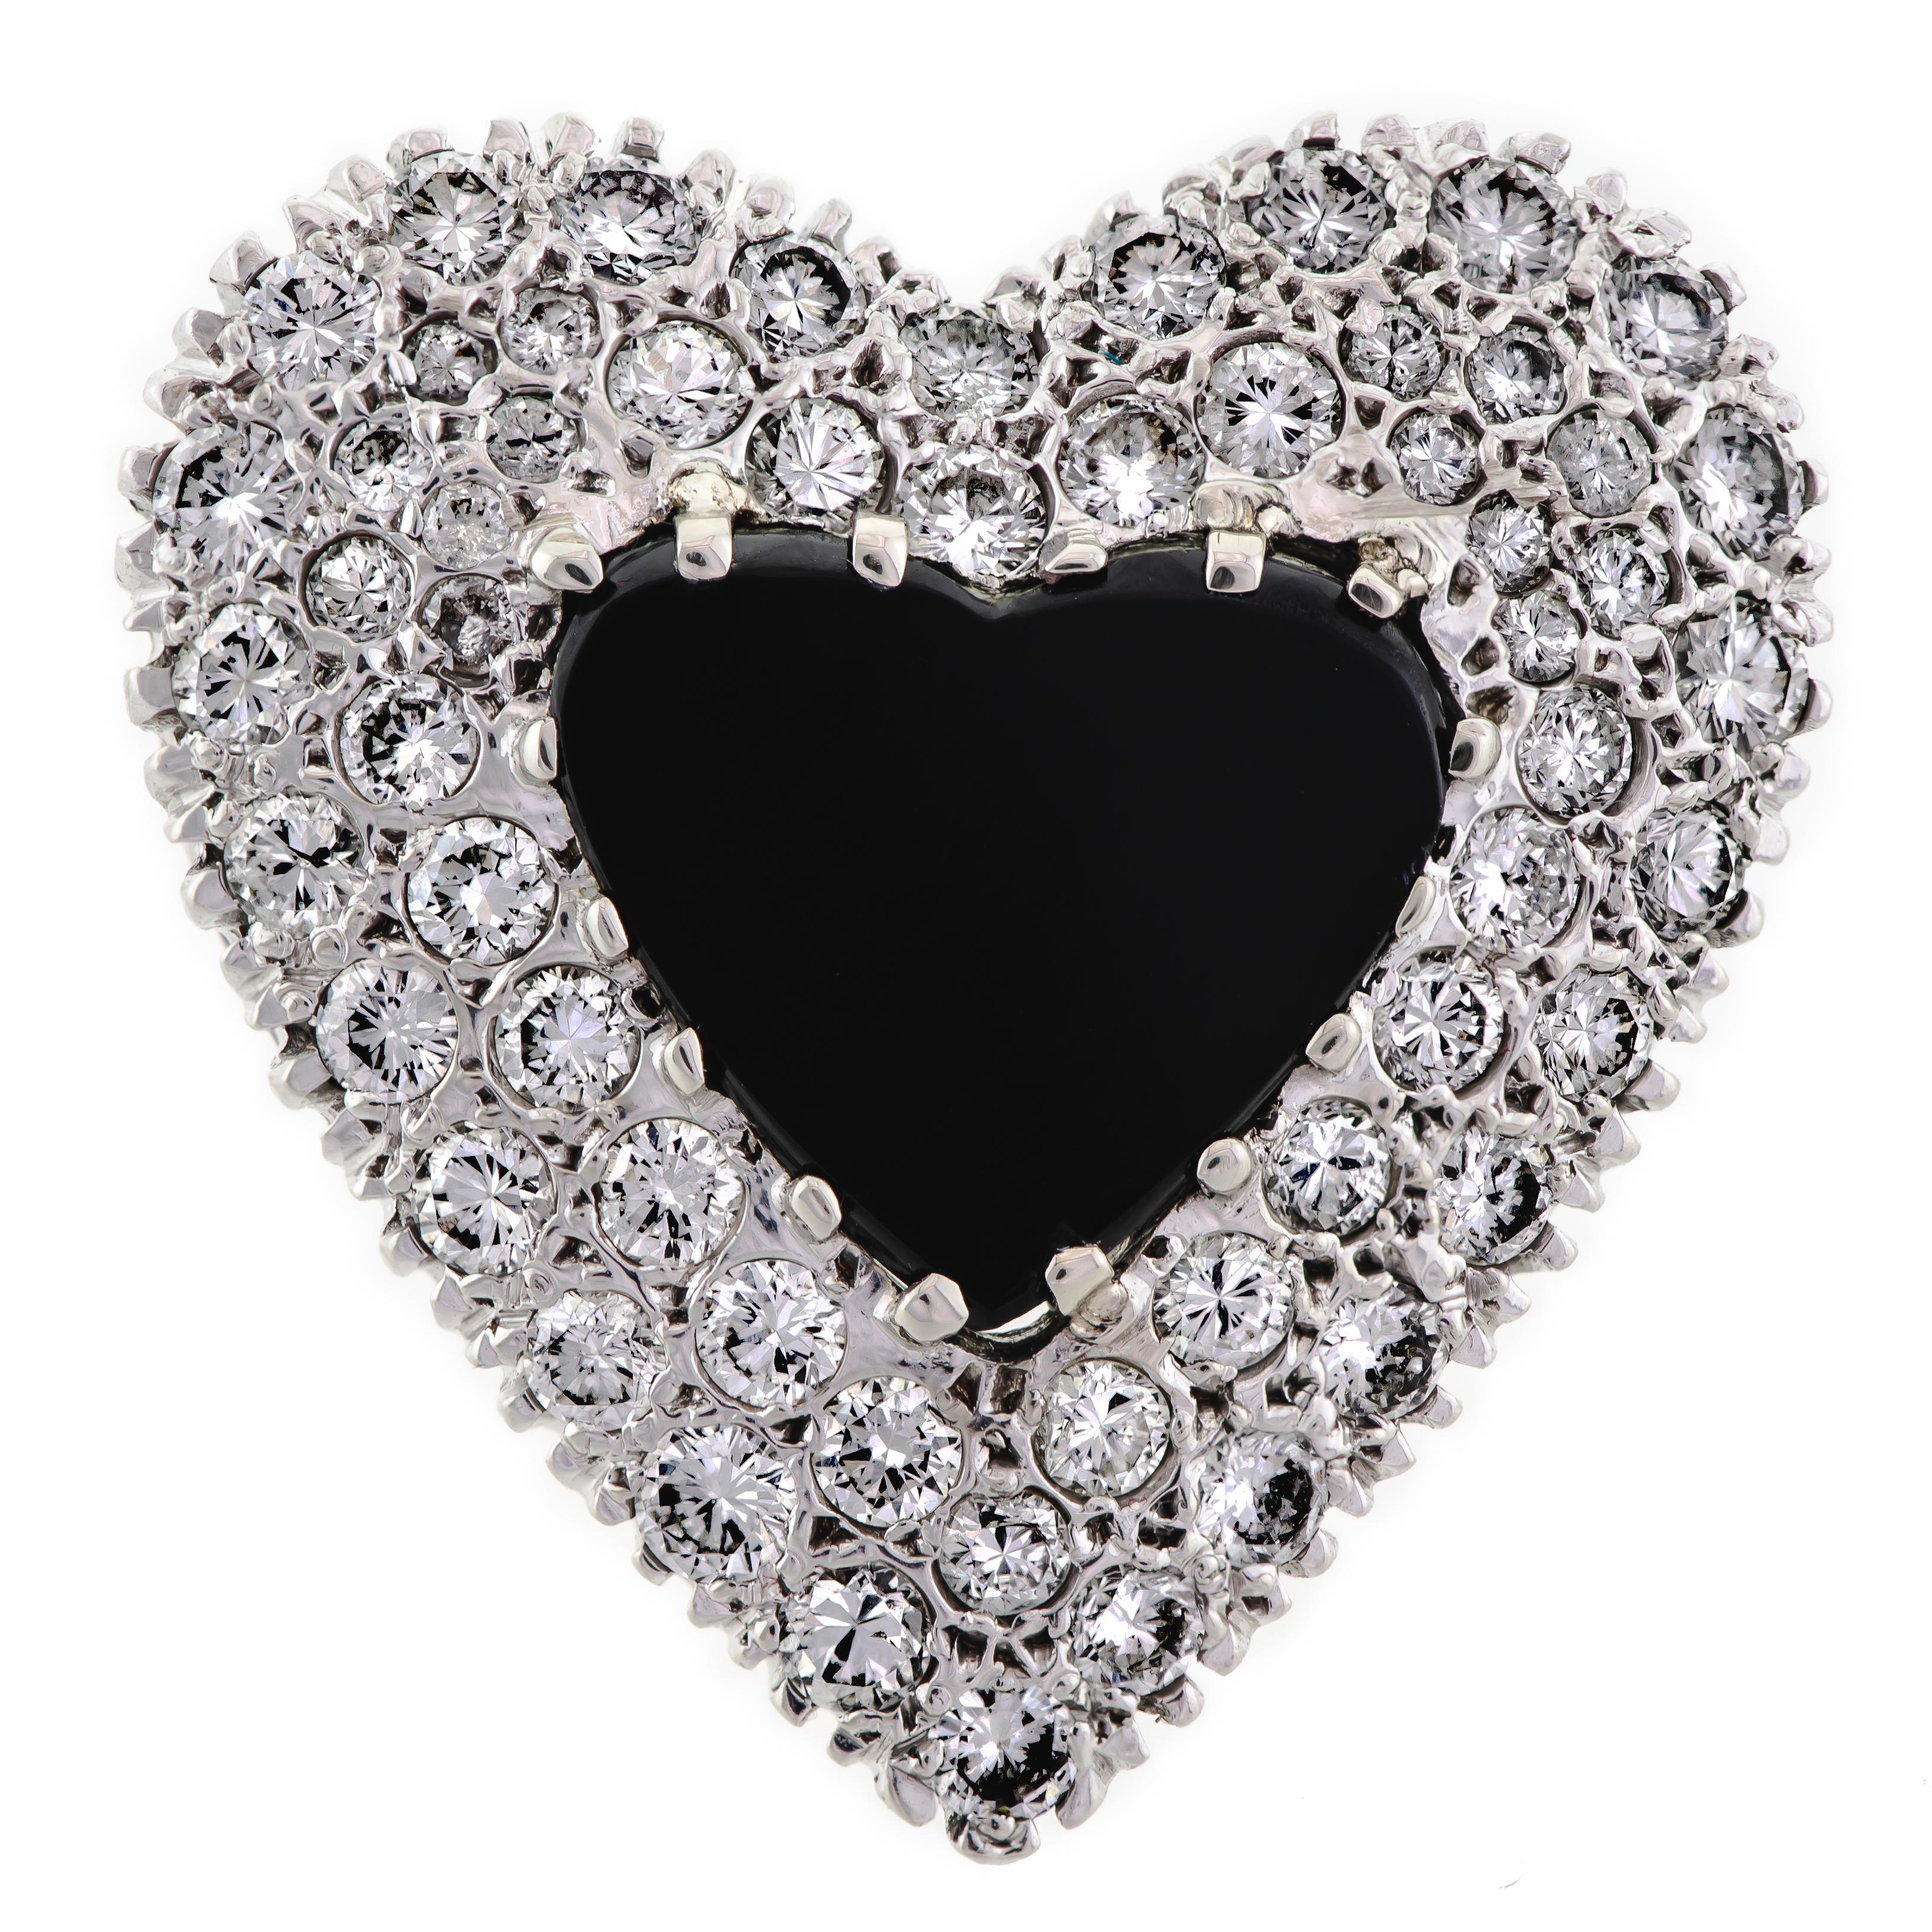 Dazzling 14 Karat White Gold, Onyx and Diamond Heart-Shaped Cocktail Ring For Sale